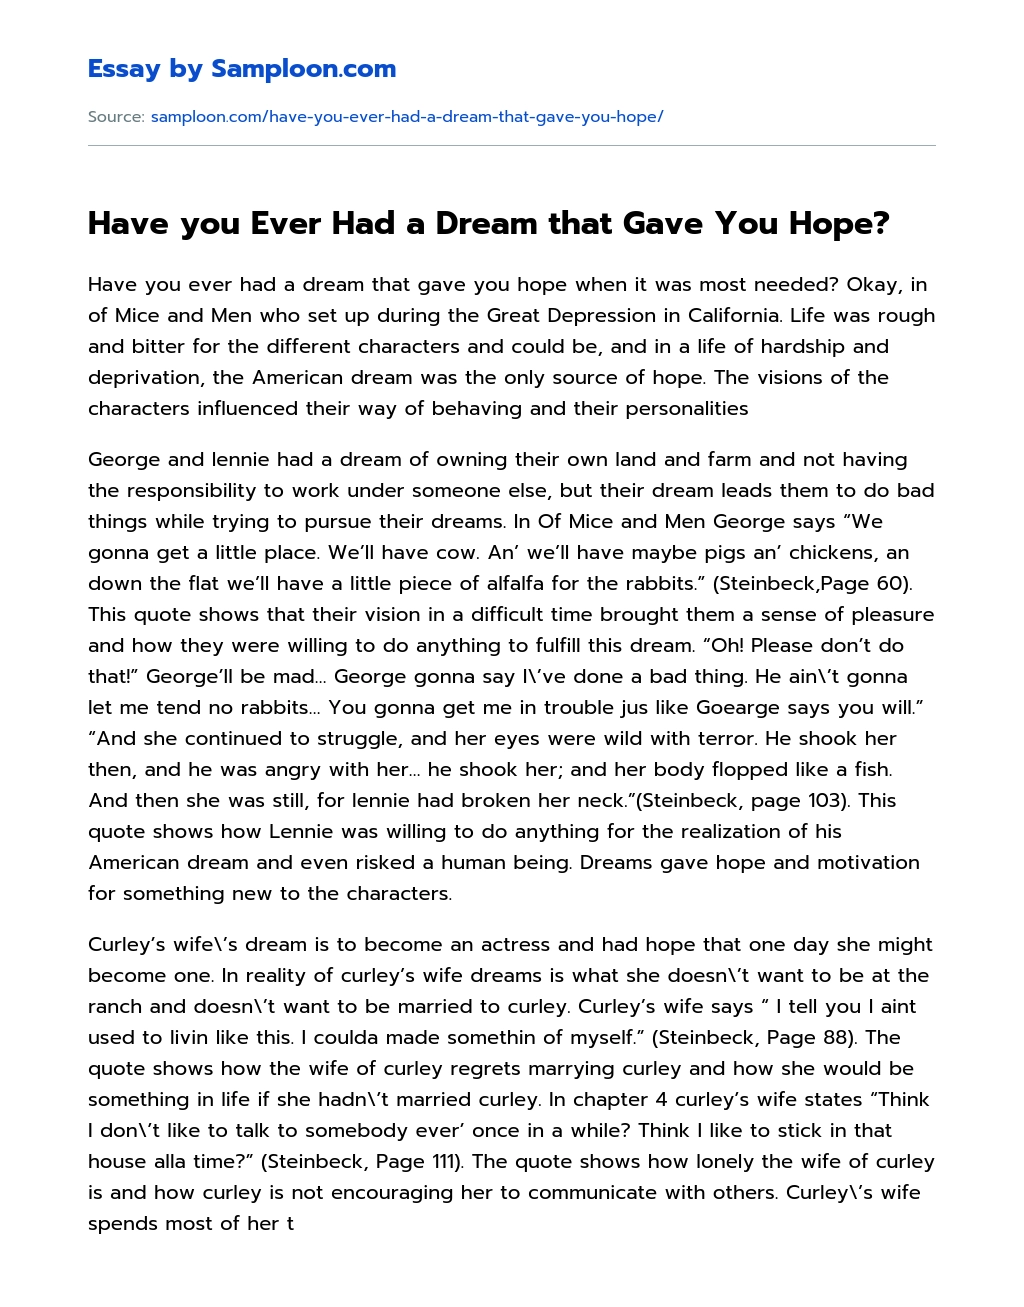 Have you Ever Had a Dream that Gave You Hope? essay